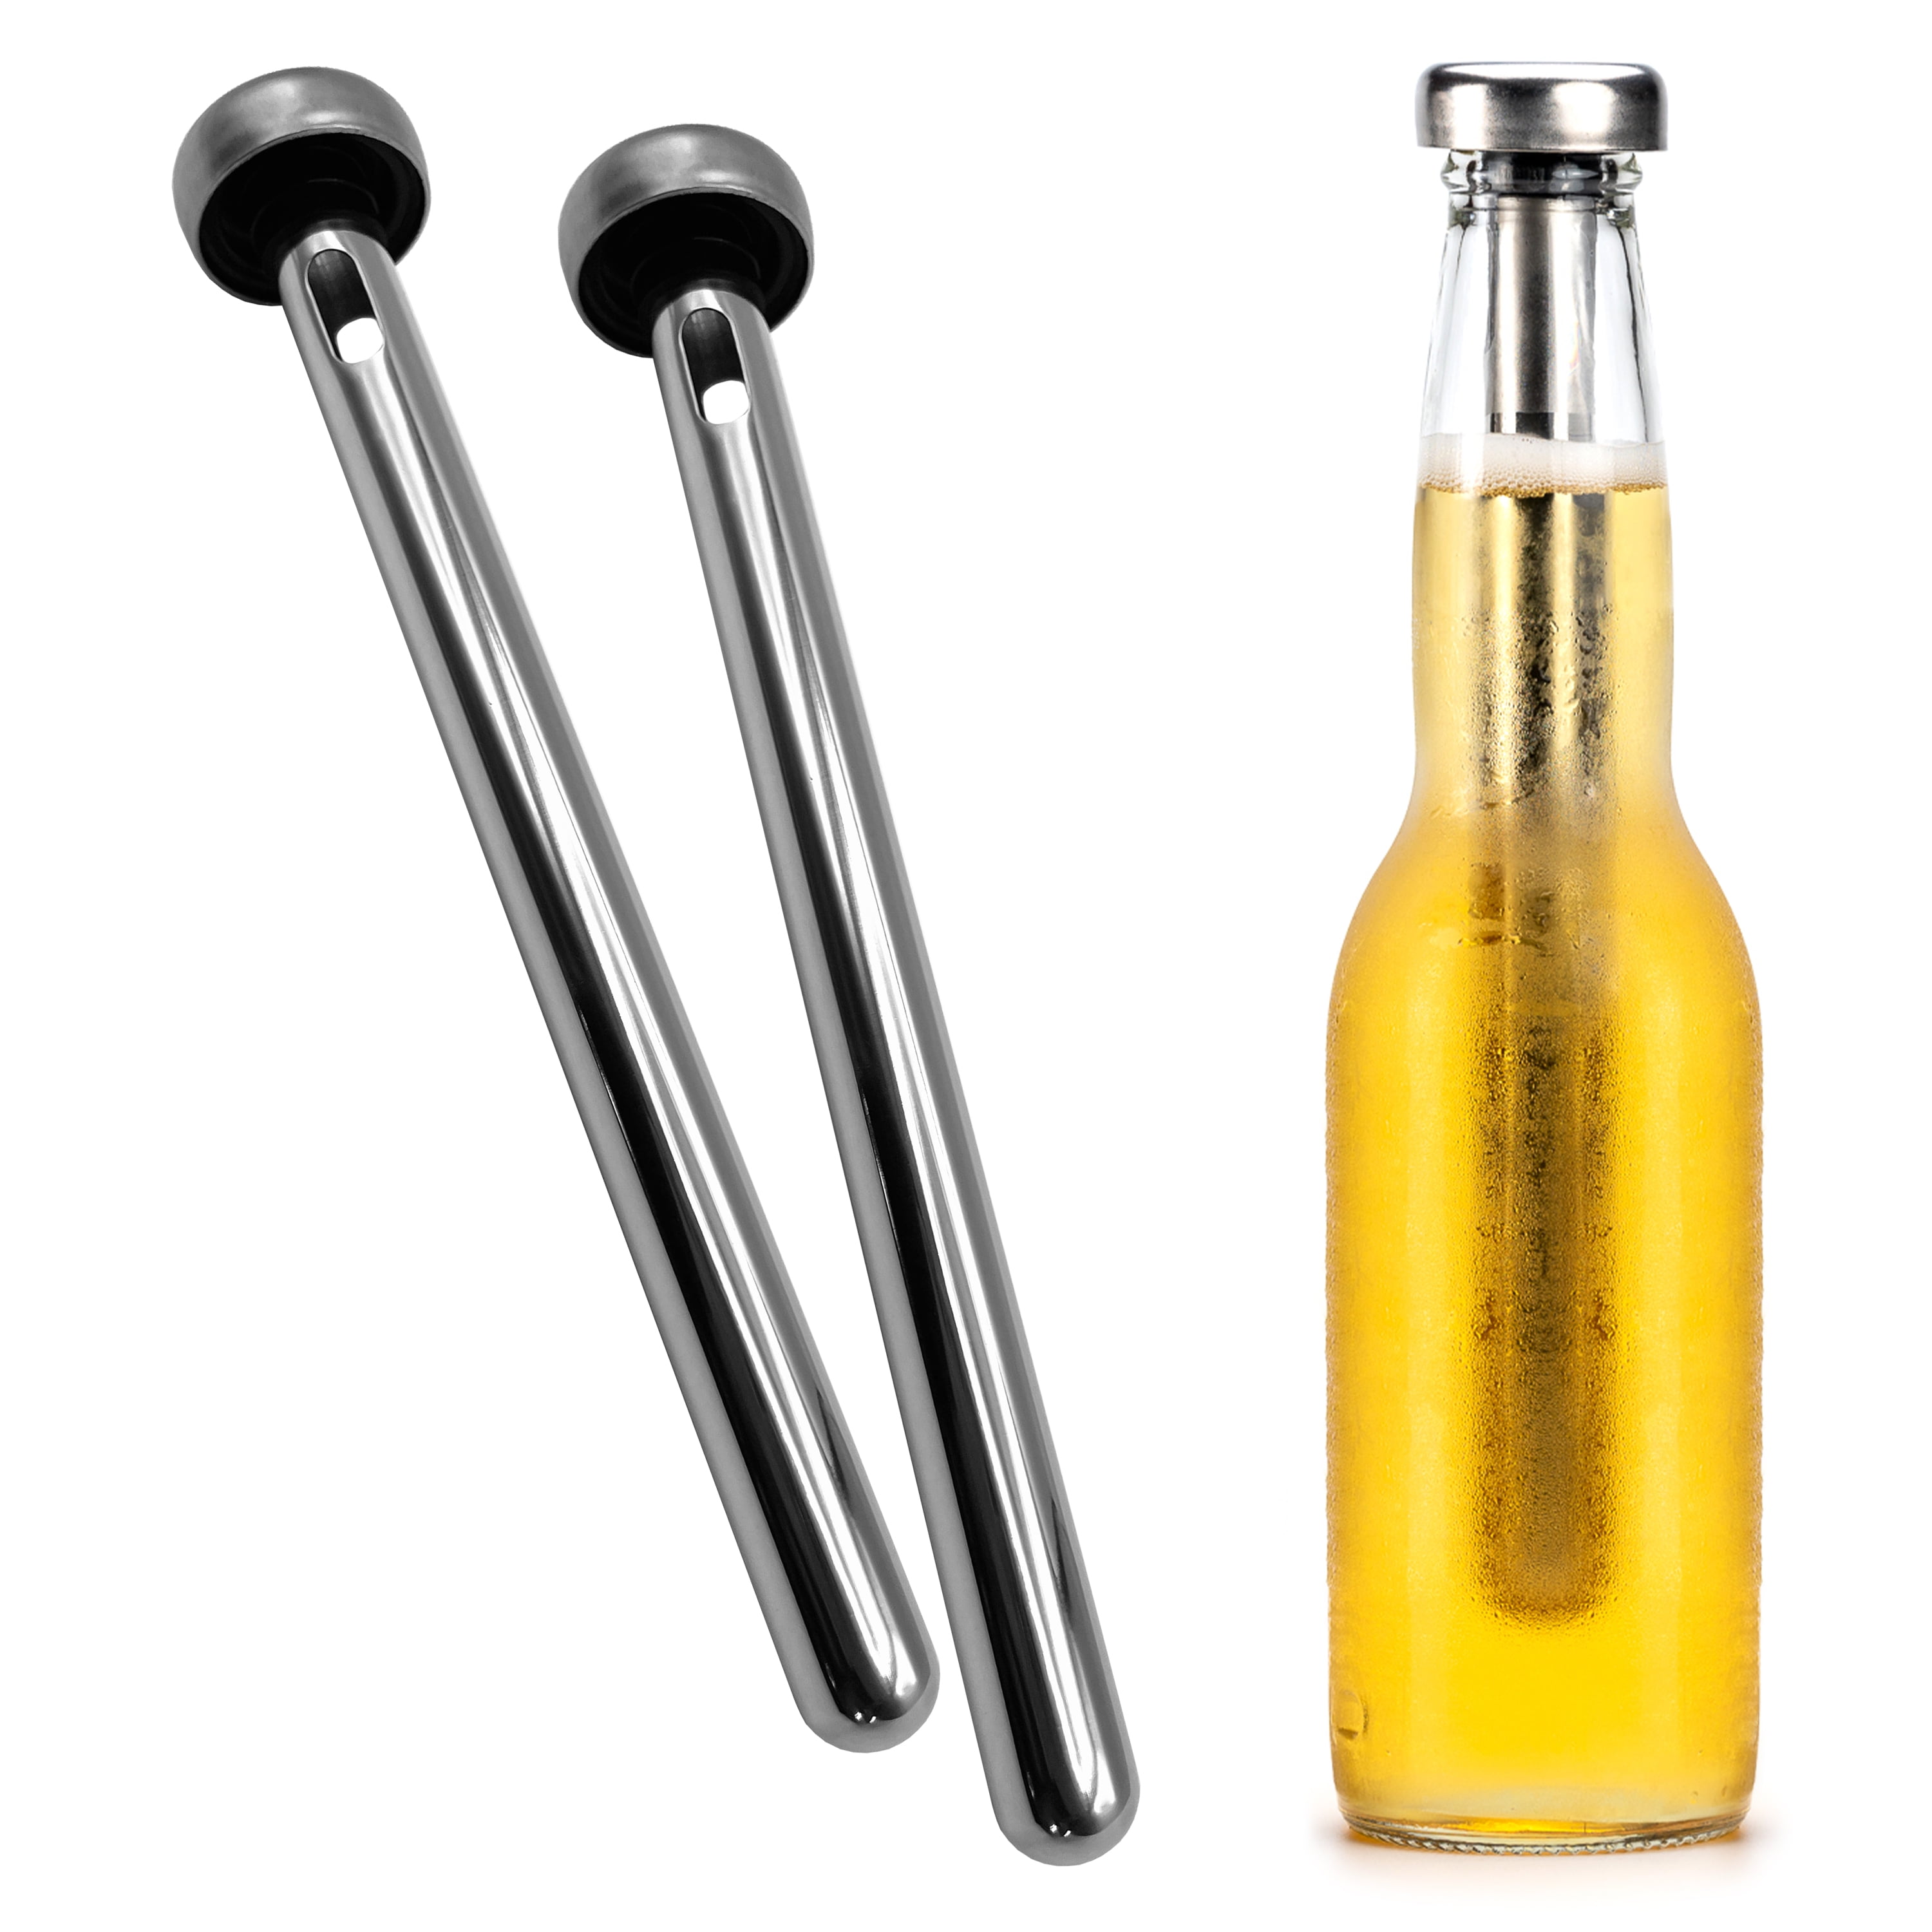 Tronixpro Stainless Steel Beer Chiller Sticks with Microfiber Cloth 2 